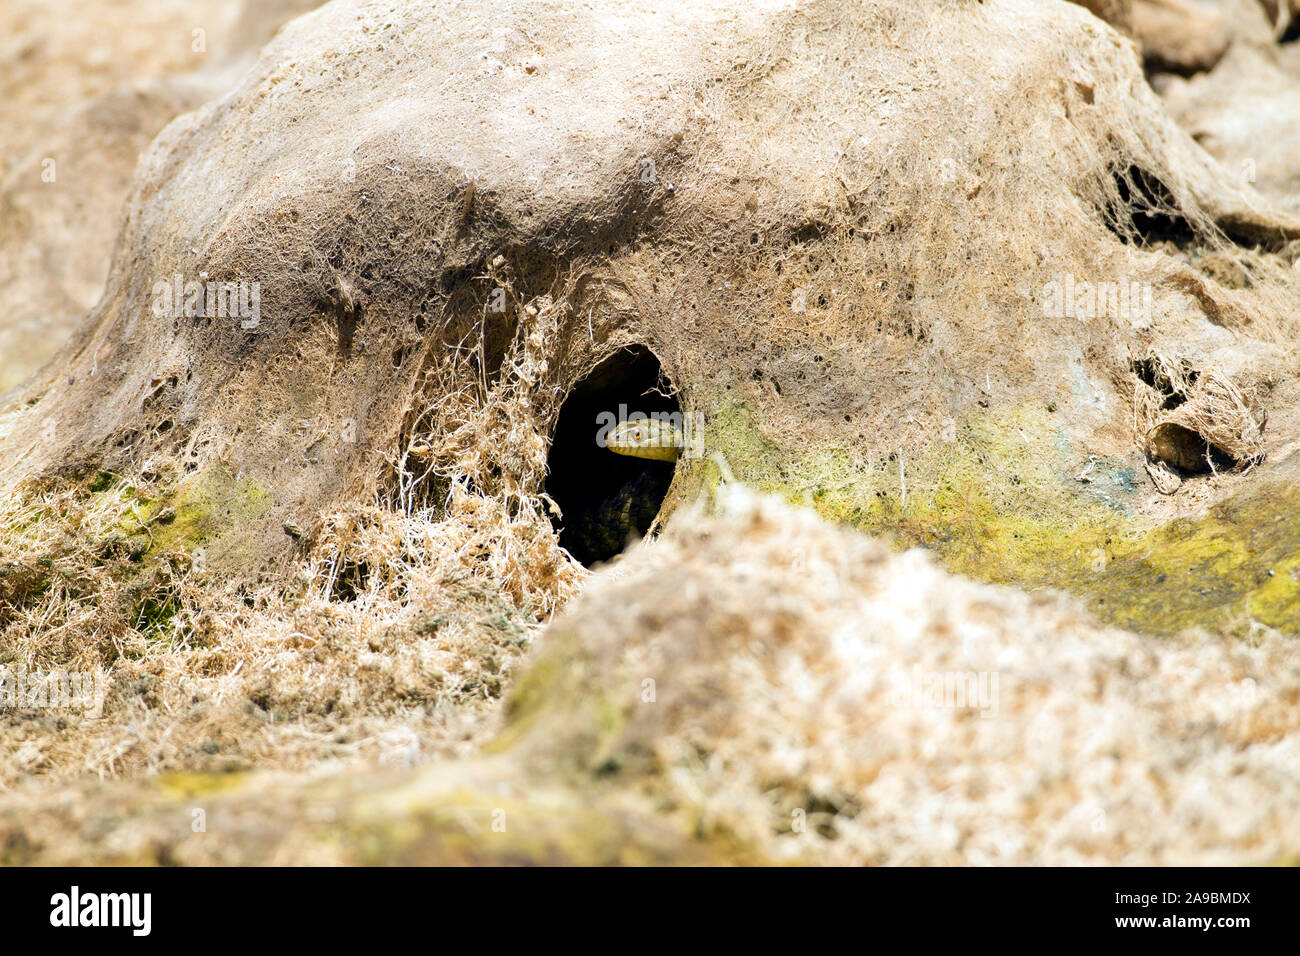 DICE SNAKE Natrix tessellata PEEPS OUT THROUGH HOLE IN DRIED UP WATER WEED IN CRETE. Stock Photo